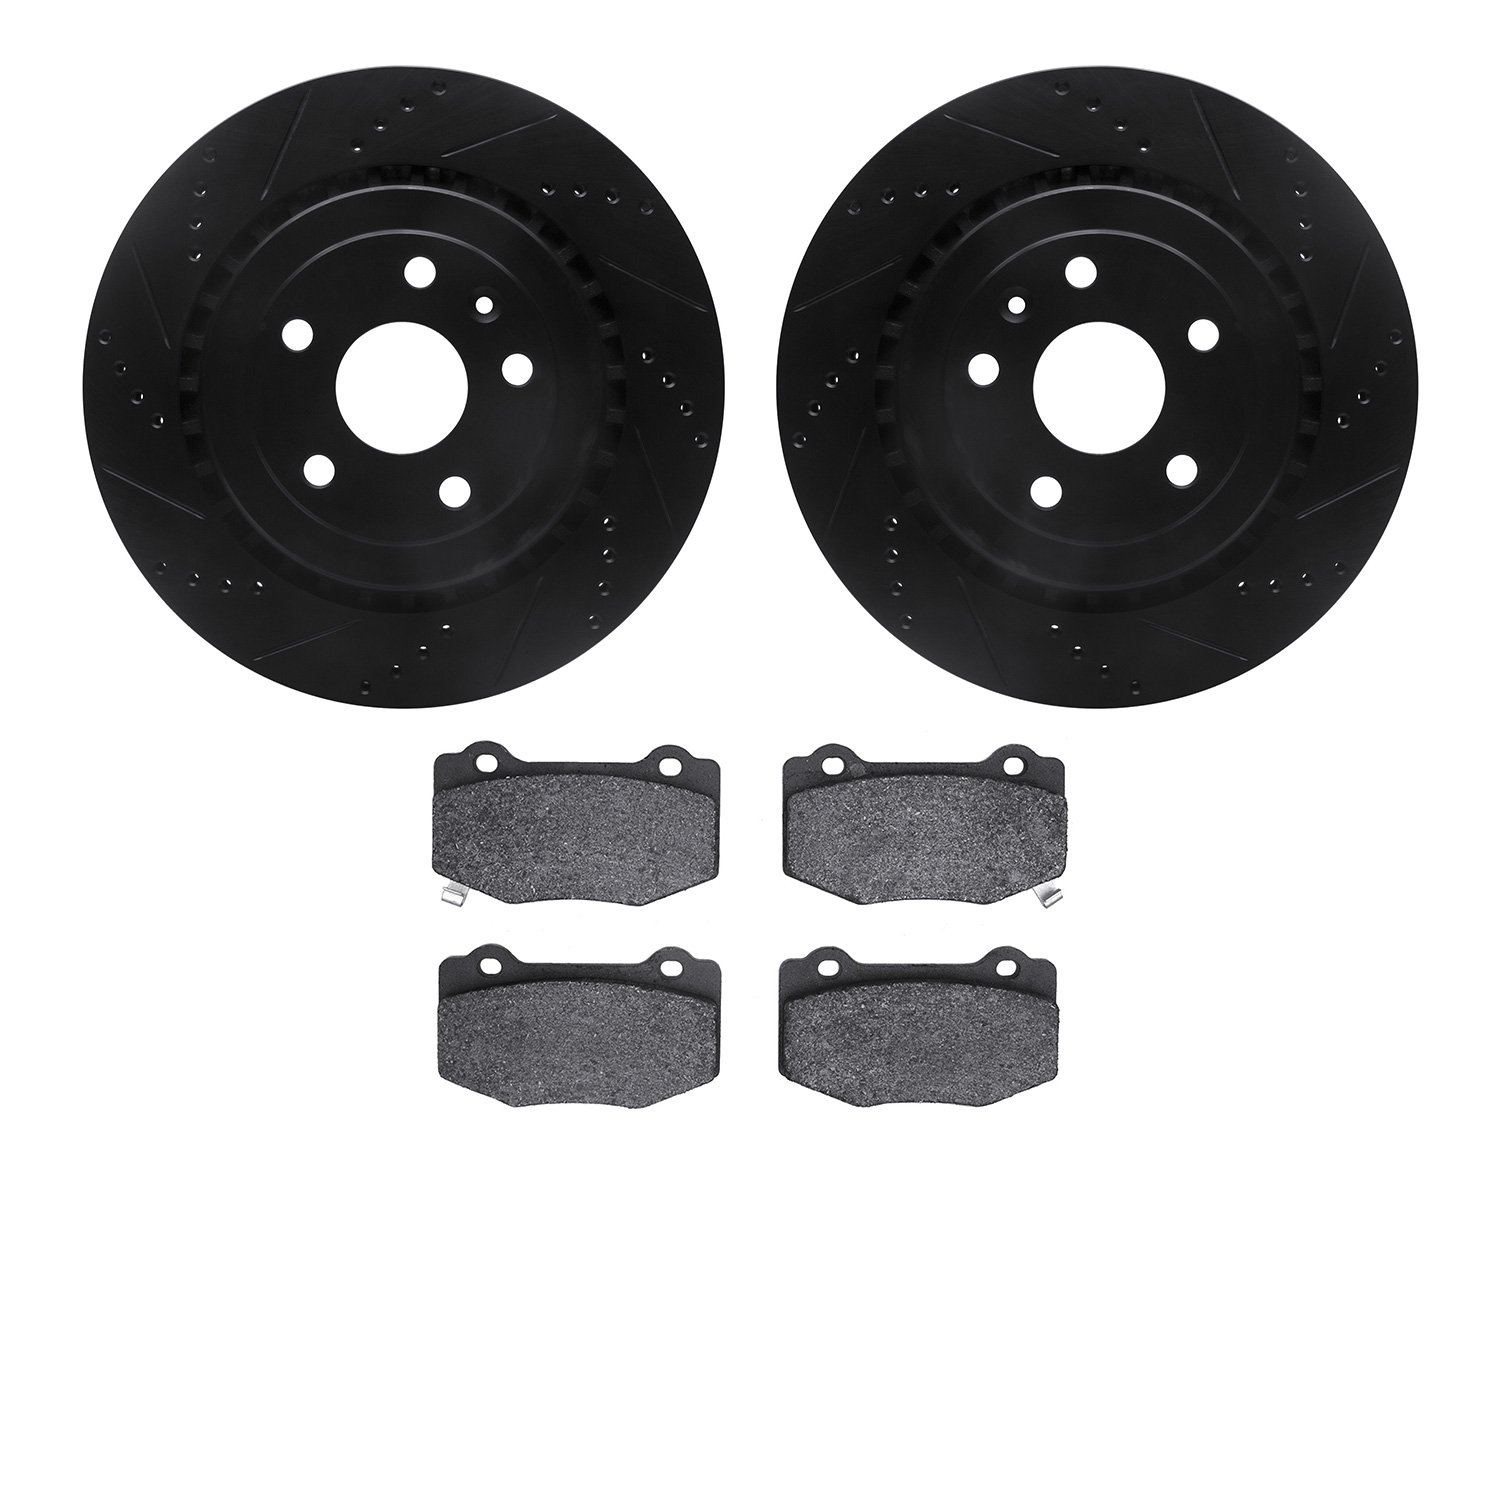 8302-47068 Drilled/Slotted Brake Rotors with 3000-Series Ceramic Brake Pads Kit [Black], Fits Select GM, Position: Rear